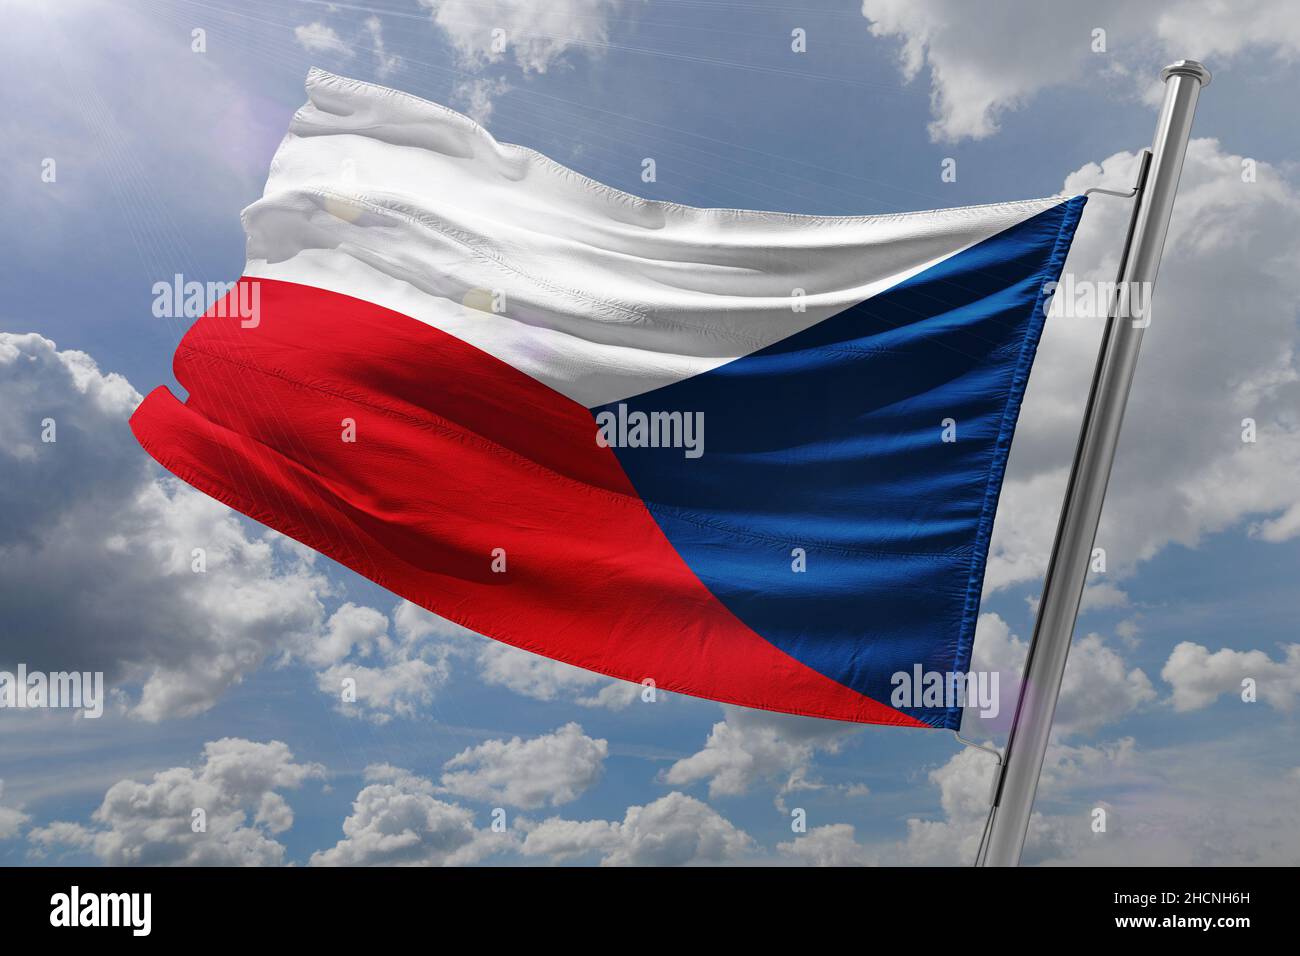 The national flag of the Czech Republic Stock Photo